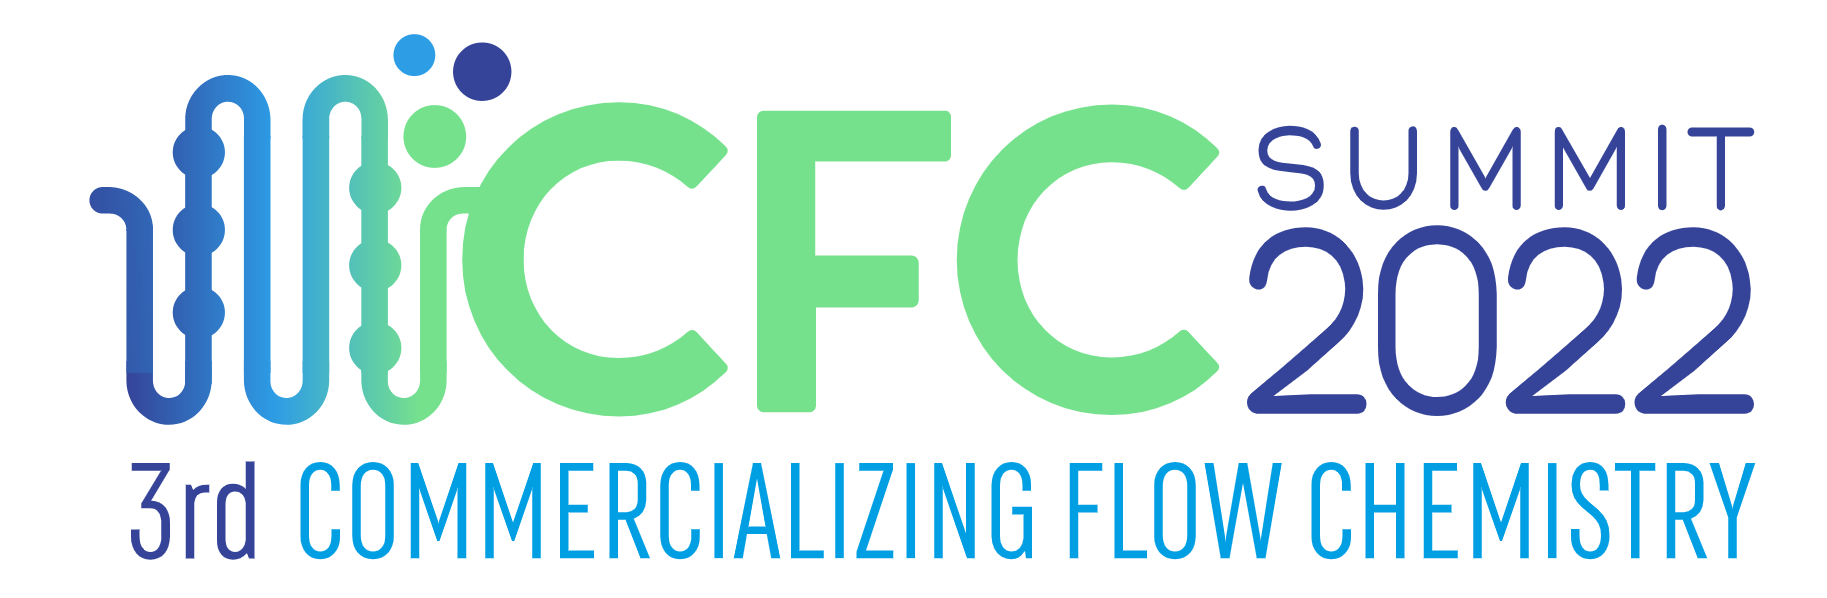 3rd Commercializing Flow Chemistry Summit, Boston - 11-13 October 2022